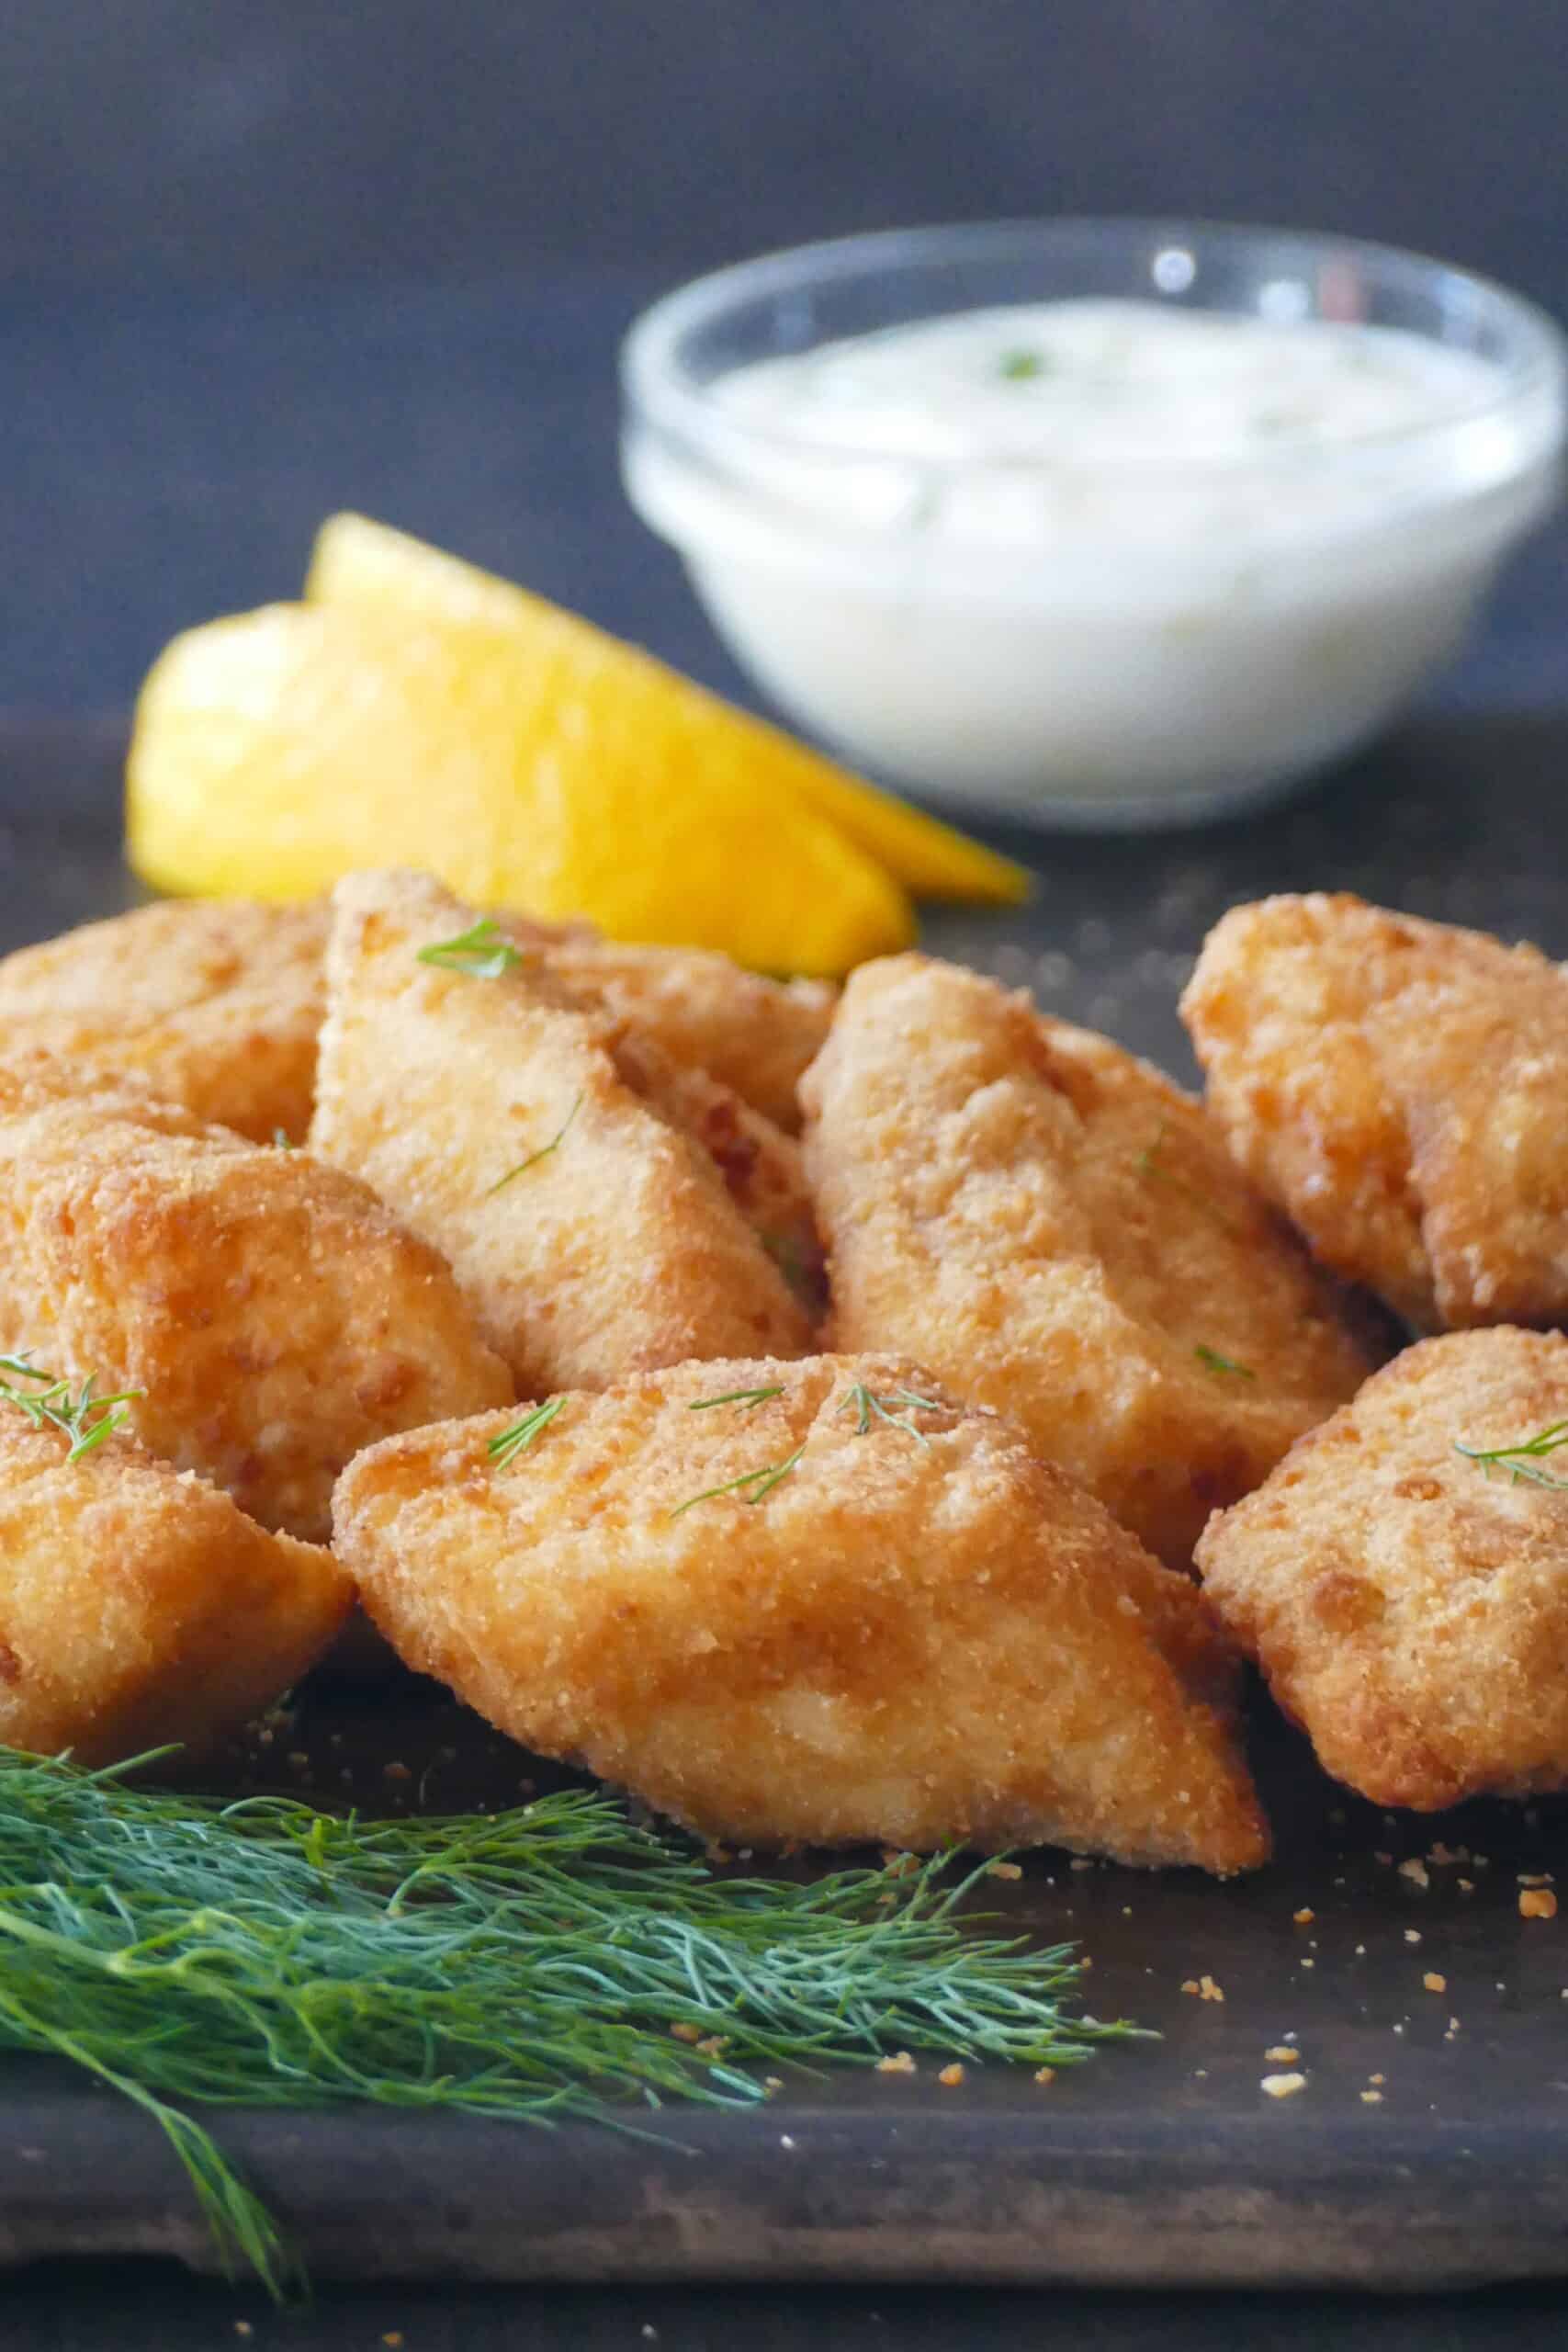 Frozen fish fillets in the air fryer - Golden fish fillets on dark surface with white sauce, dill and lemon